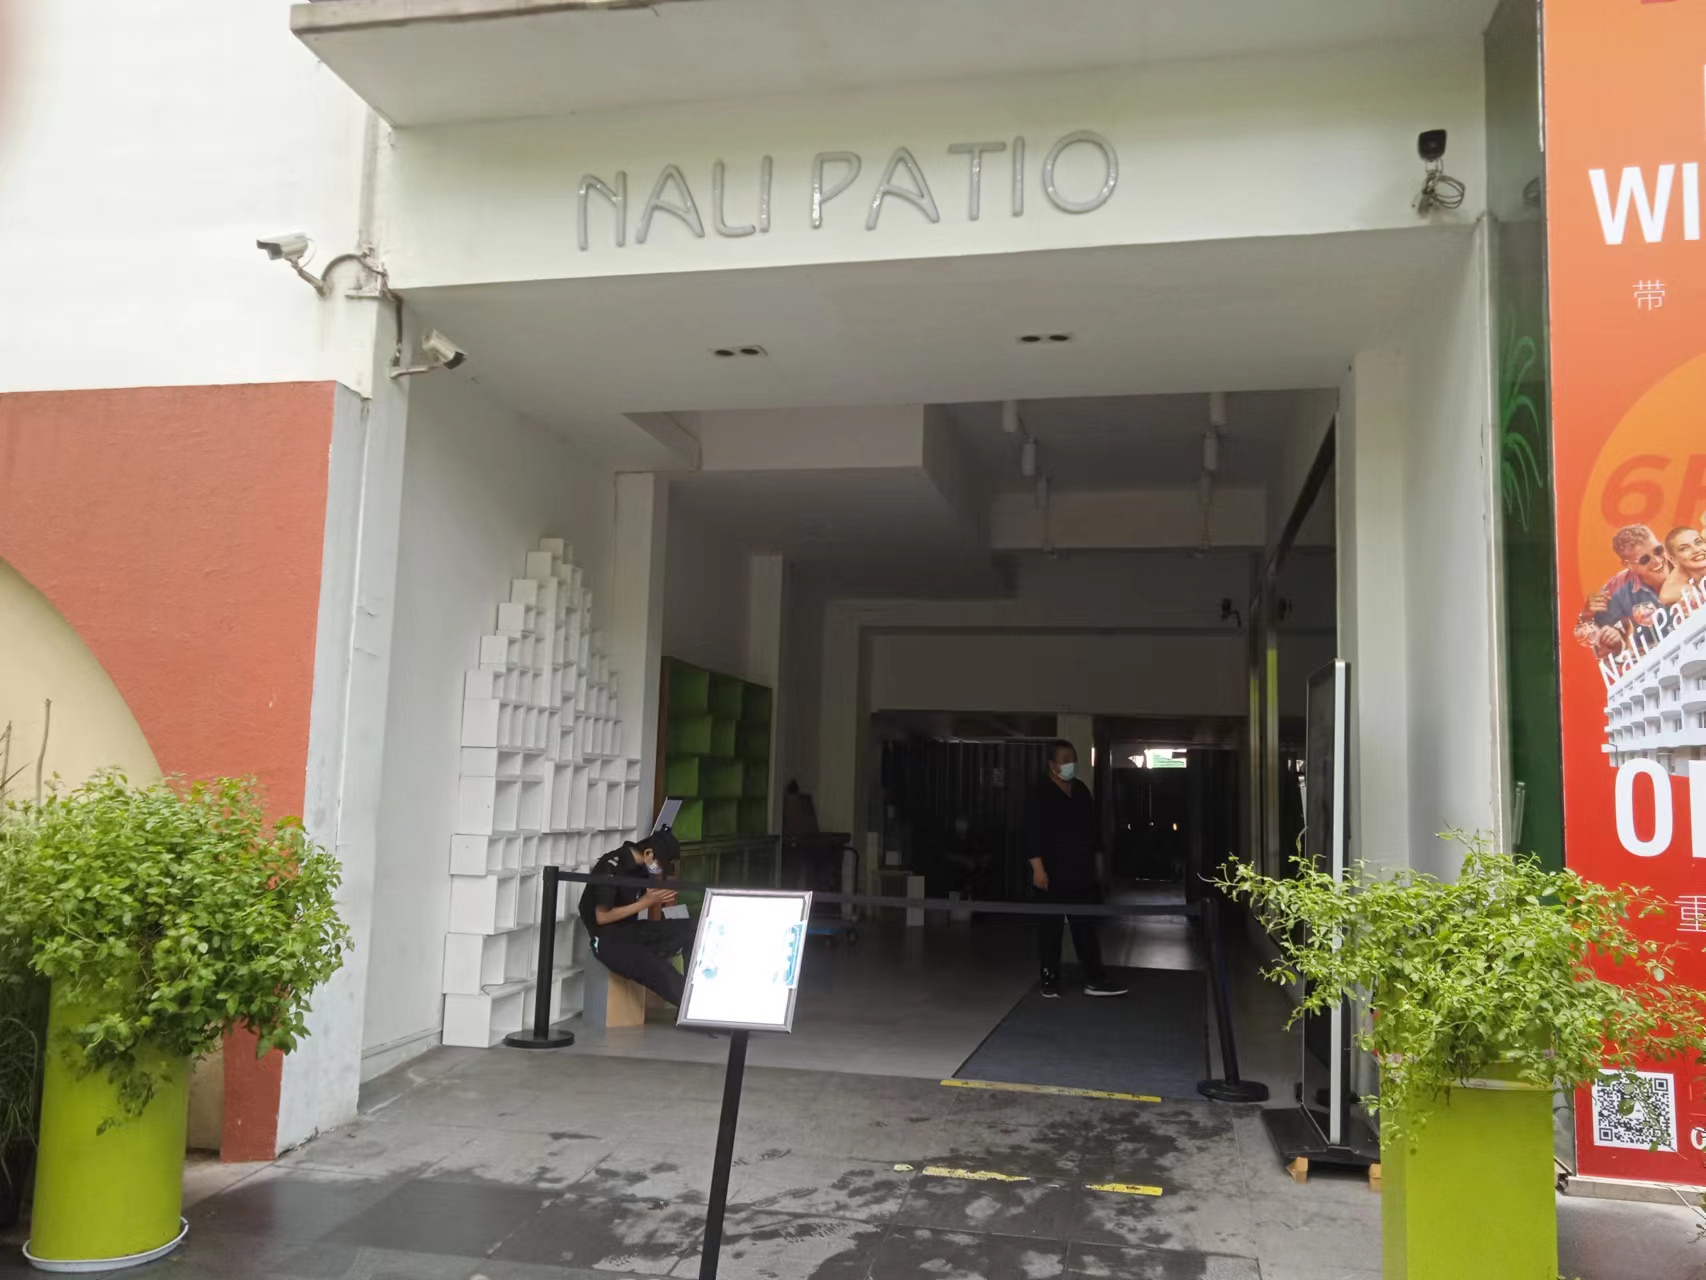 Nali Patio Closed to Public Until Further Notice